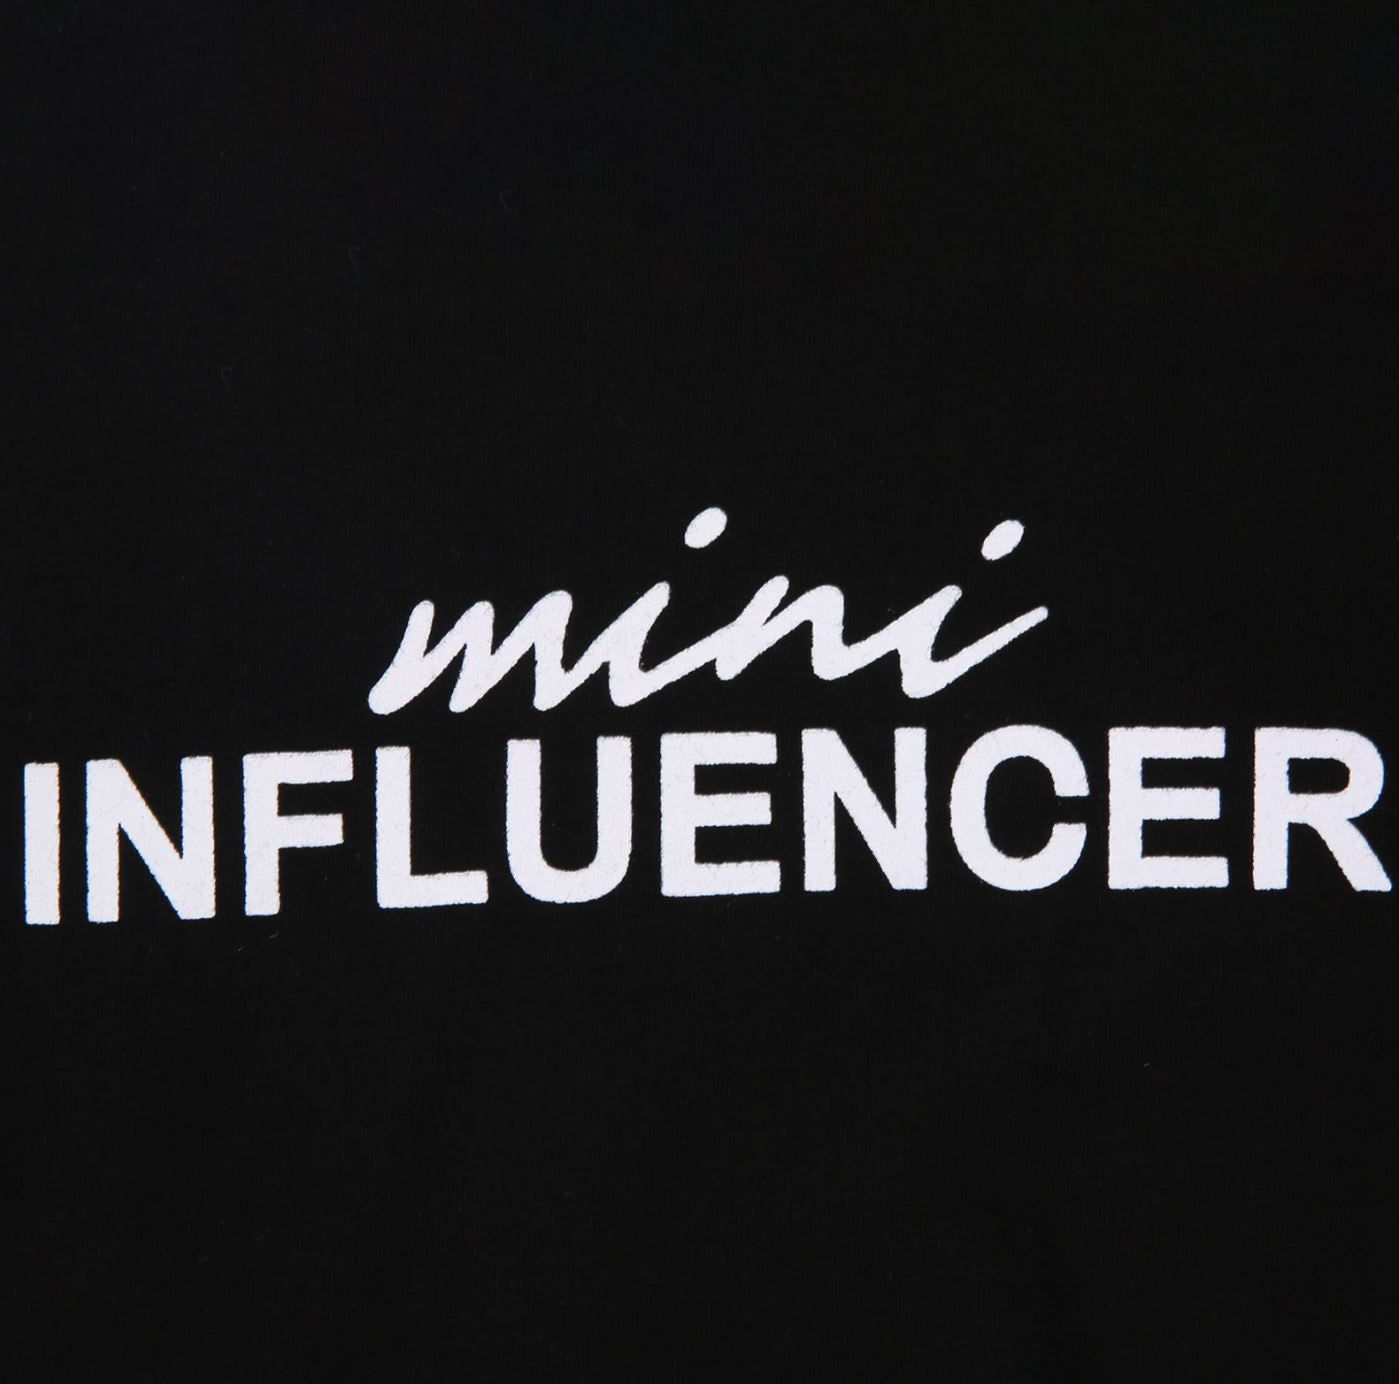 Mini Influencer Shirt – Emmie Collection